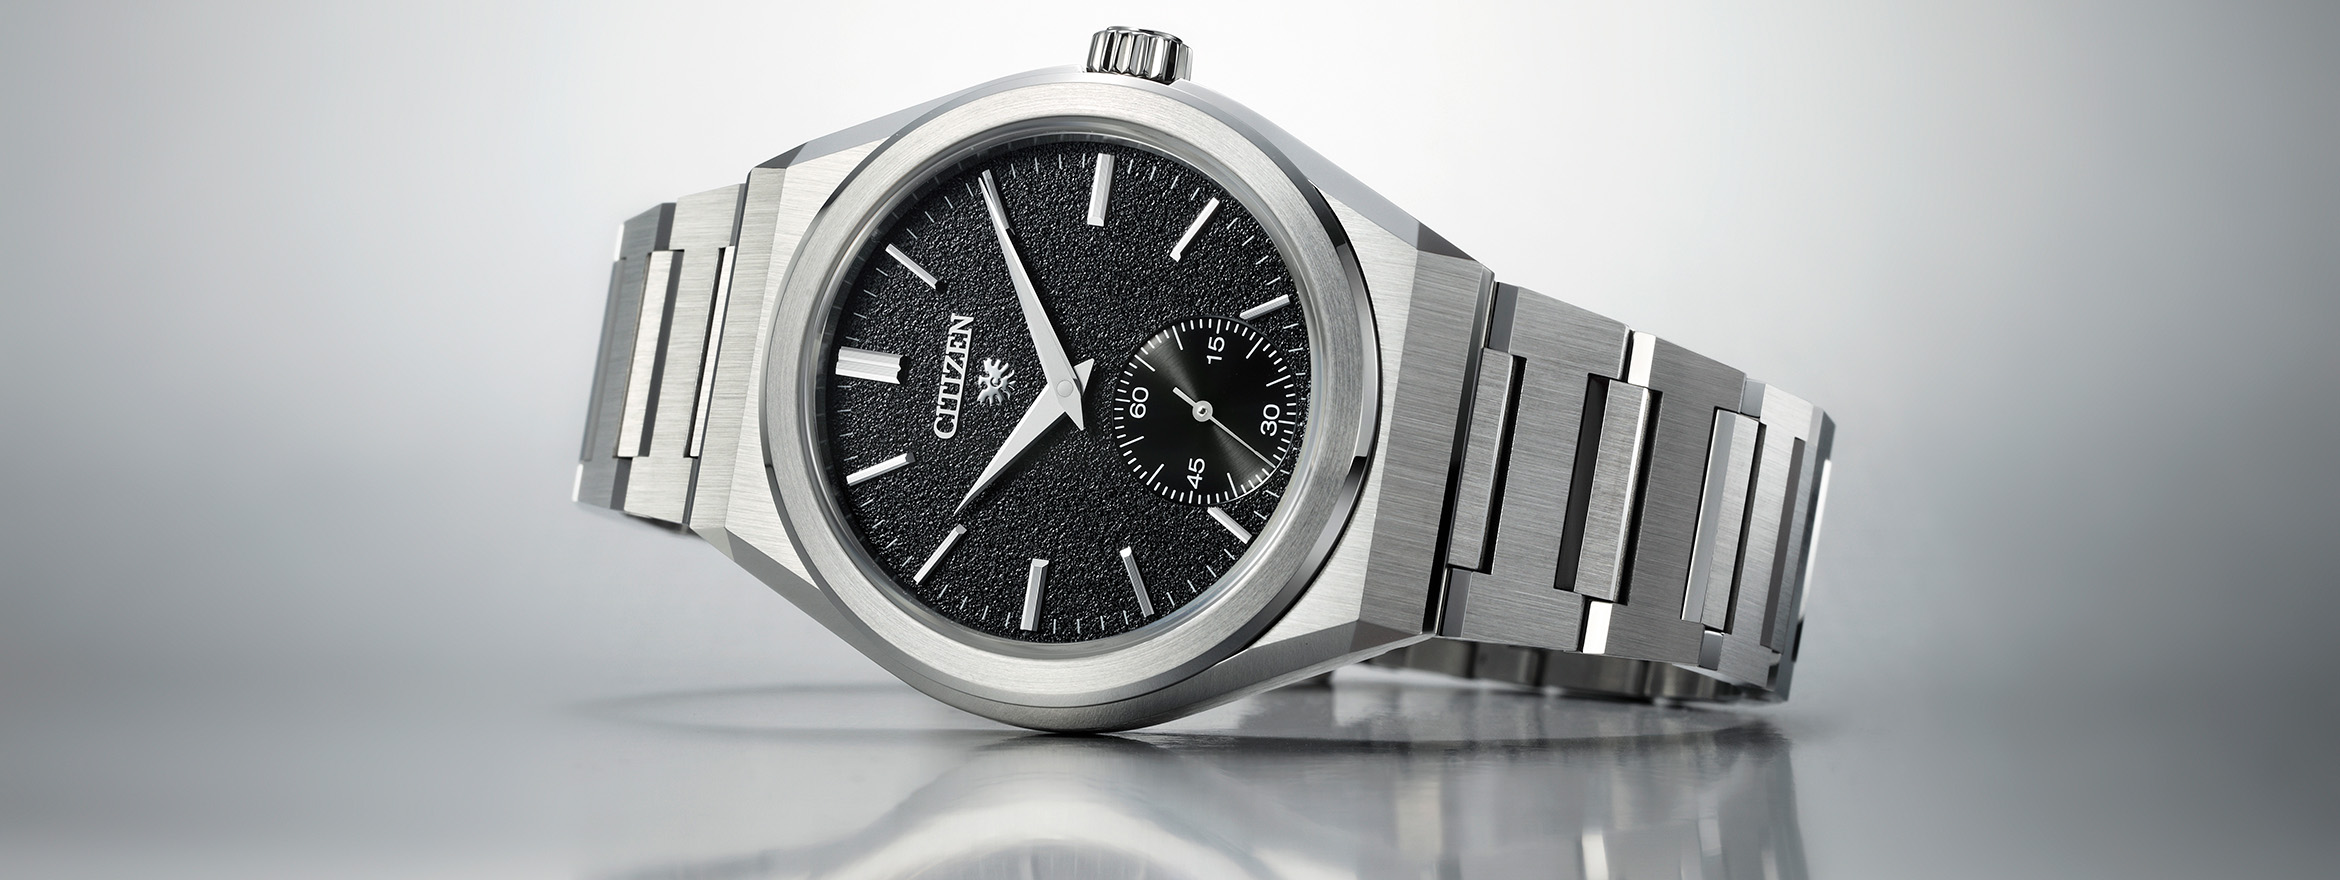 Discover the Citizen Caliber 0200 Exclusively at Watches of Switzerland